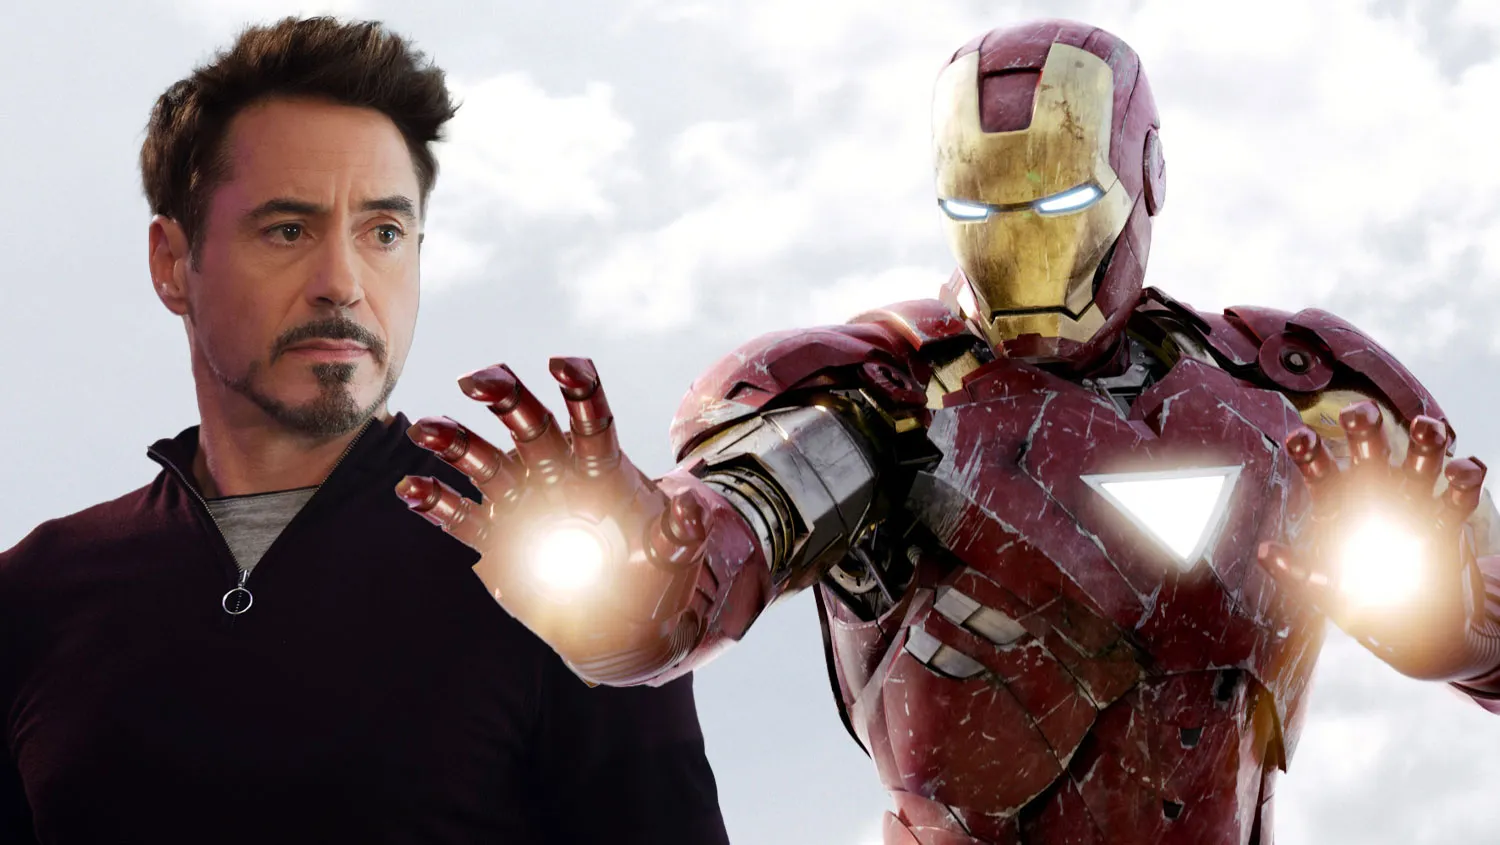 Robert Downey Jr.: From Troubled Beginnings to Hollywood Stardom